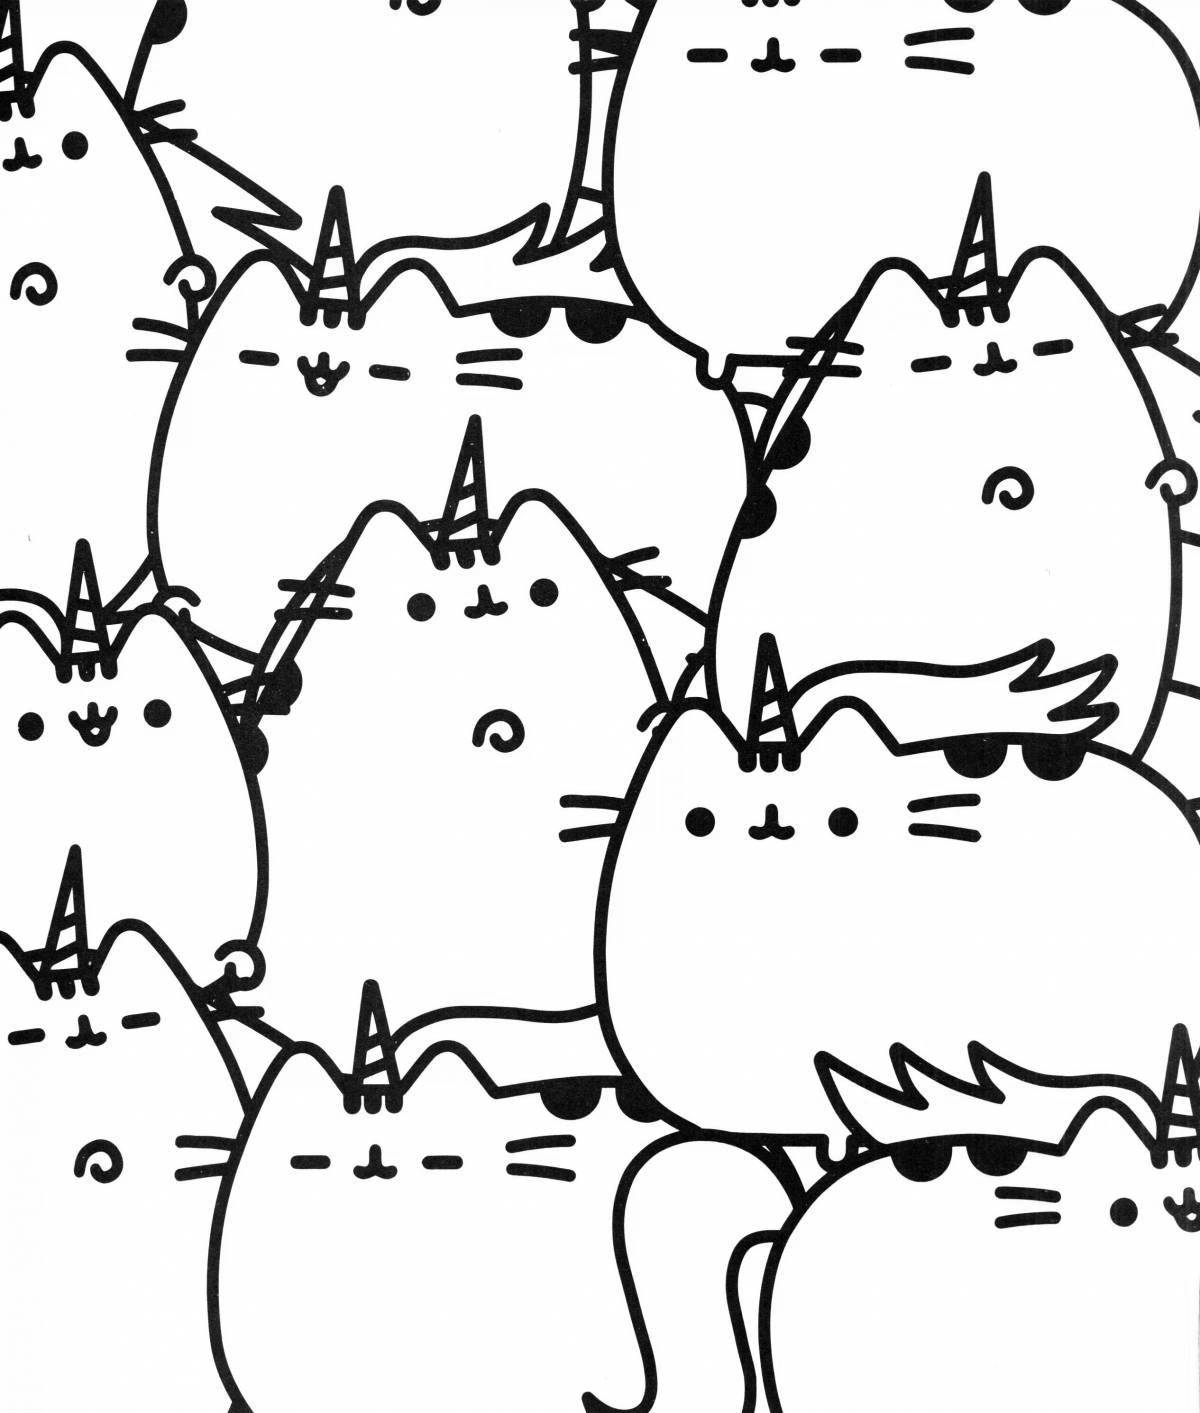 Naughty pusheen cat coloring page